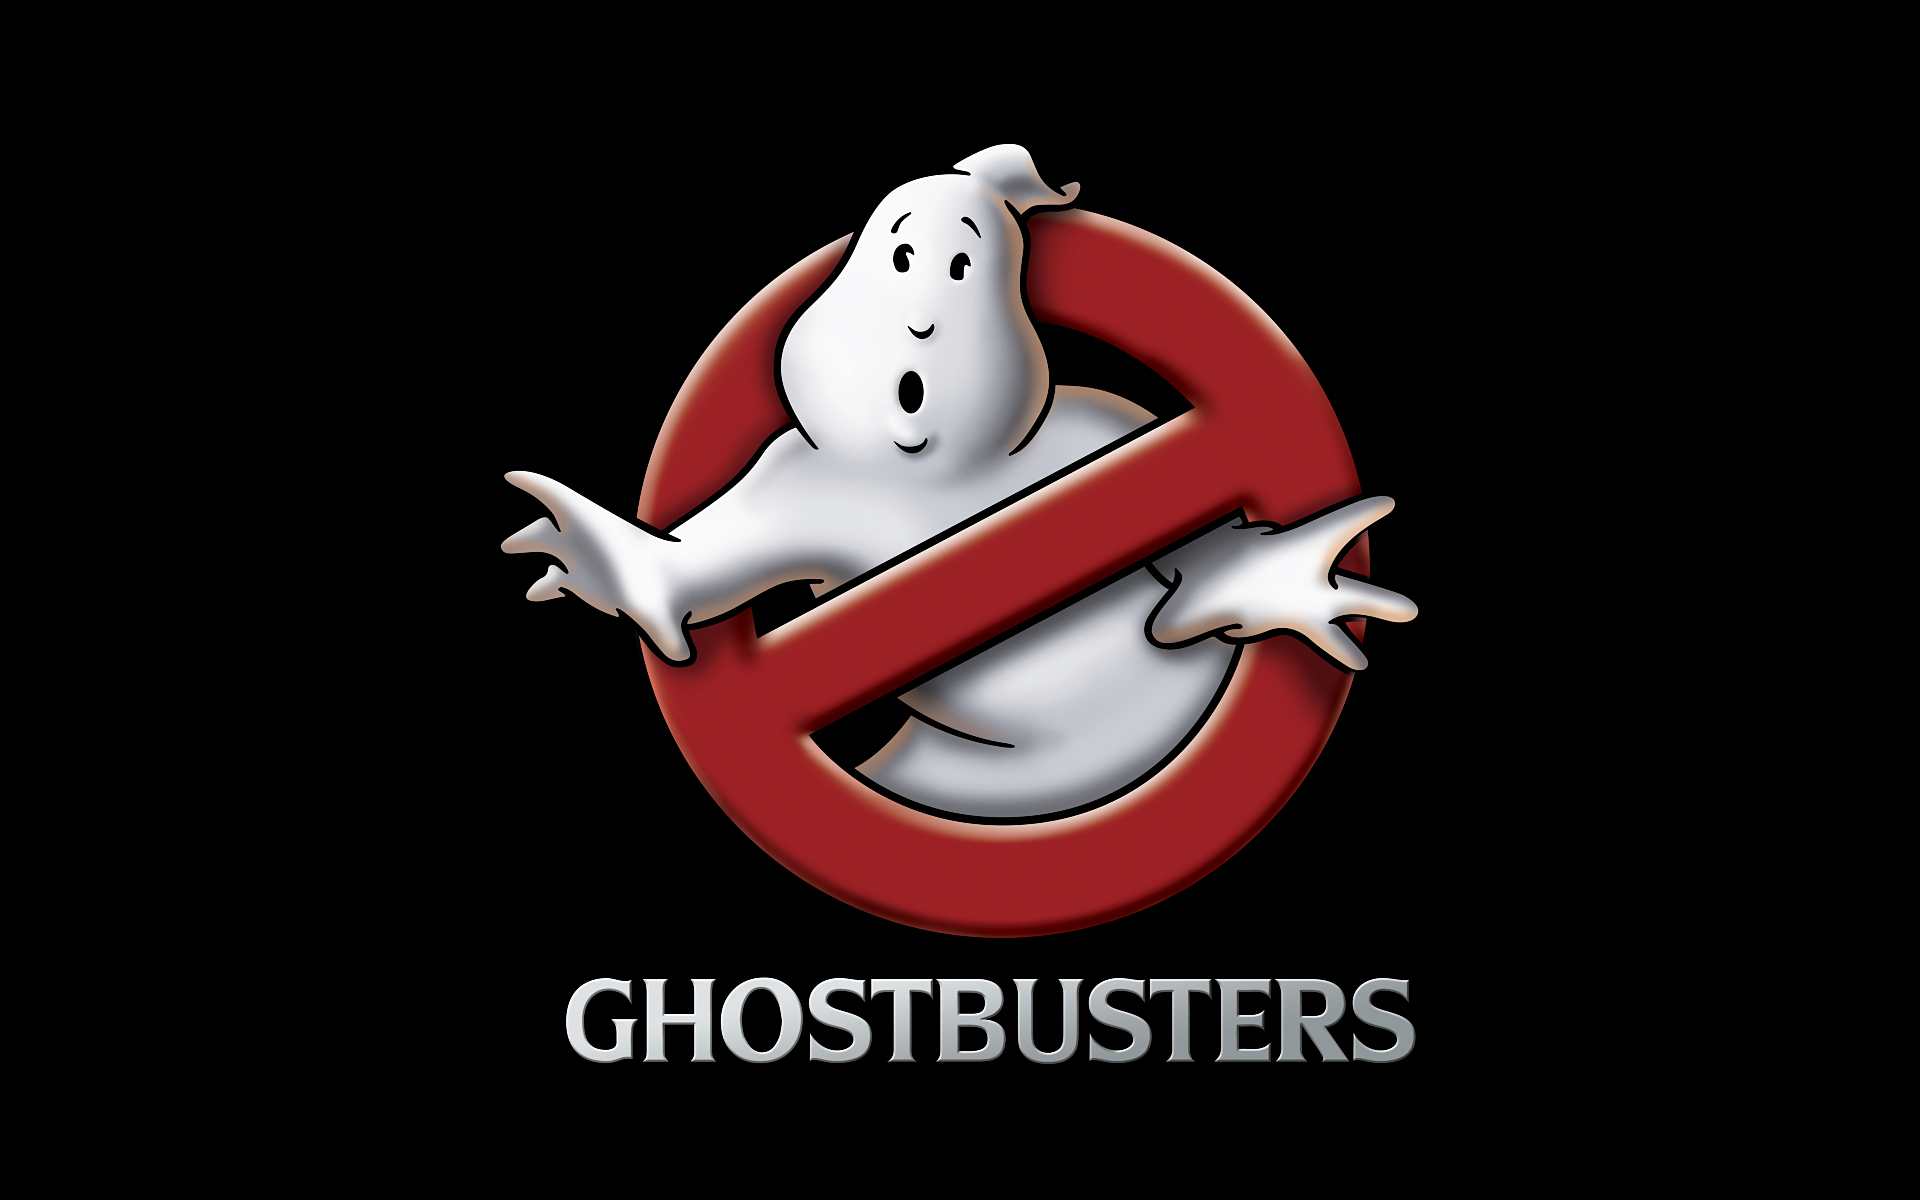 Companion Ghostbusters Movie In The Works To Complement 2016 Reboot